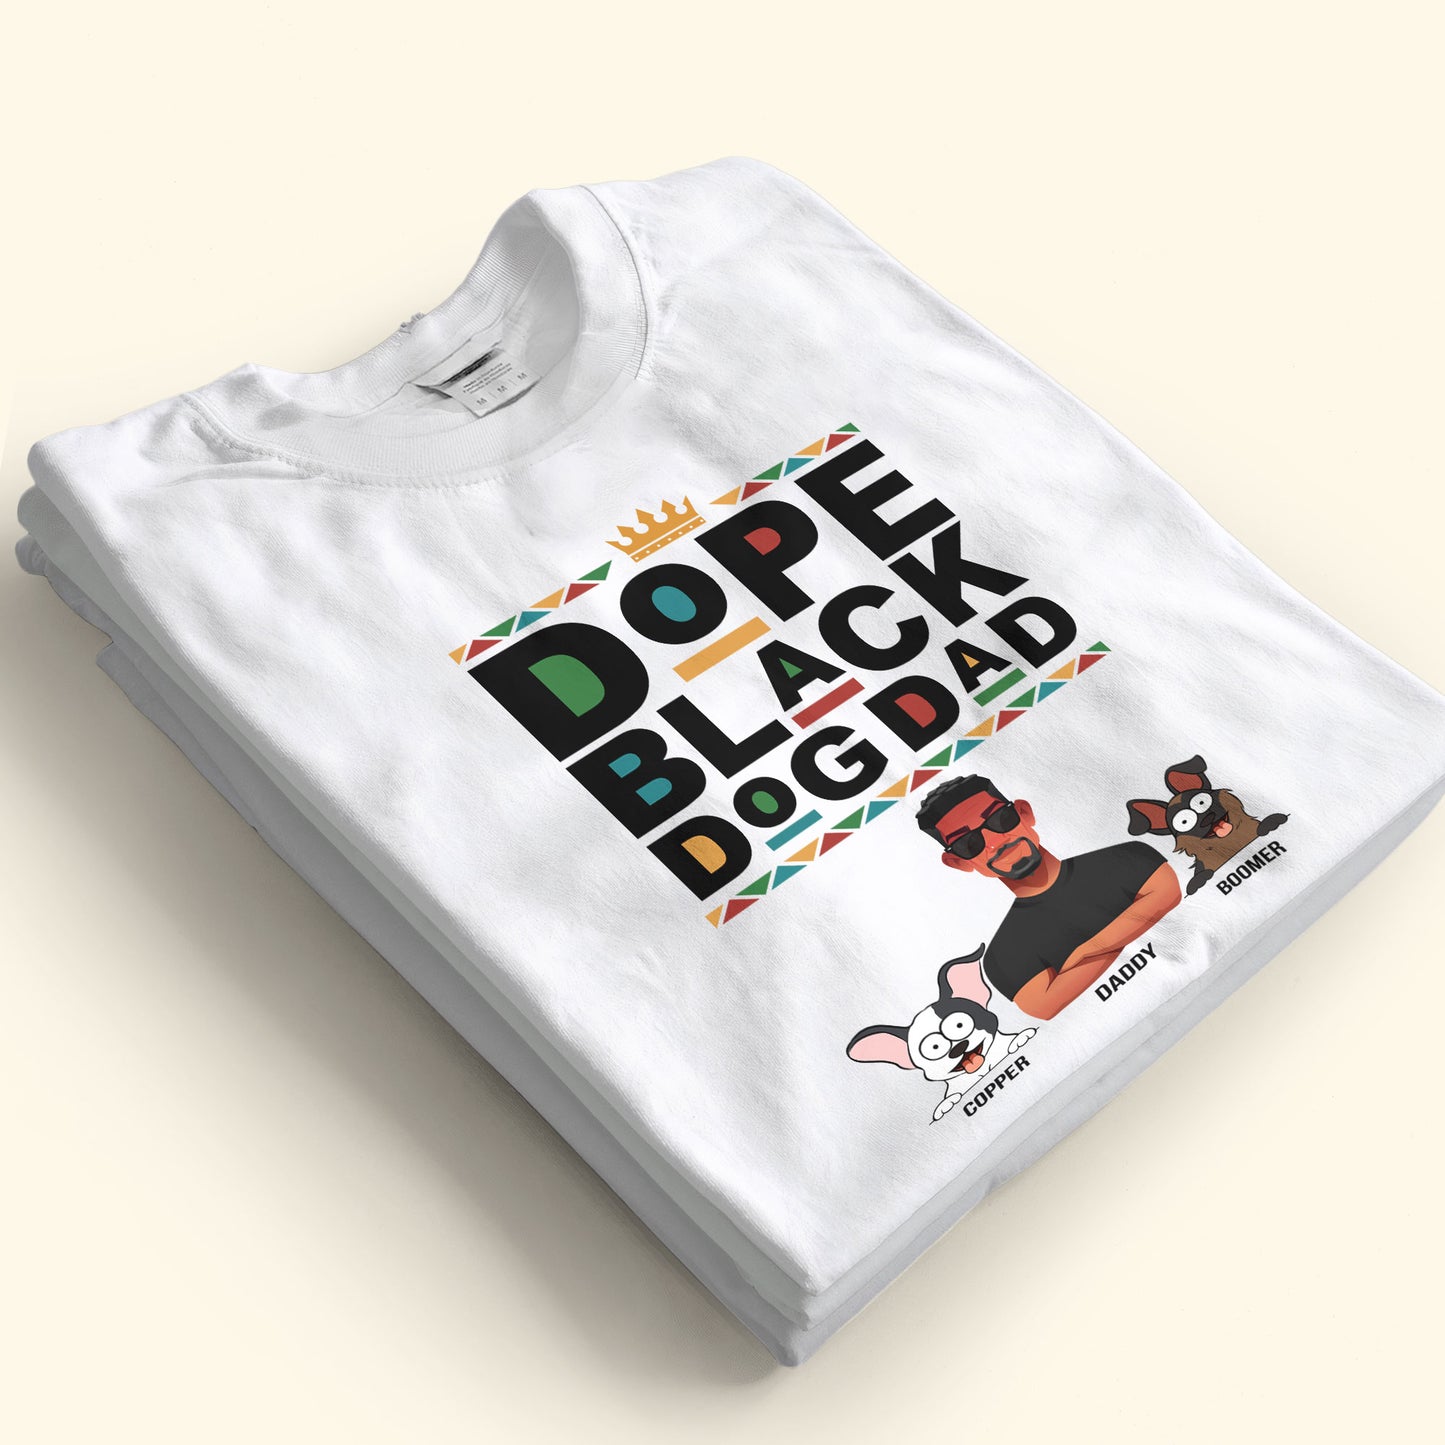 Dope Dog Dad - Personalized Shirt